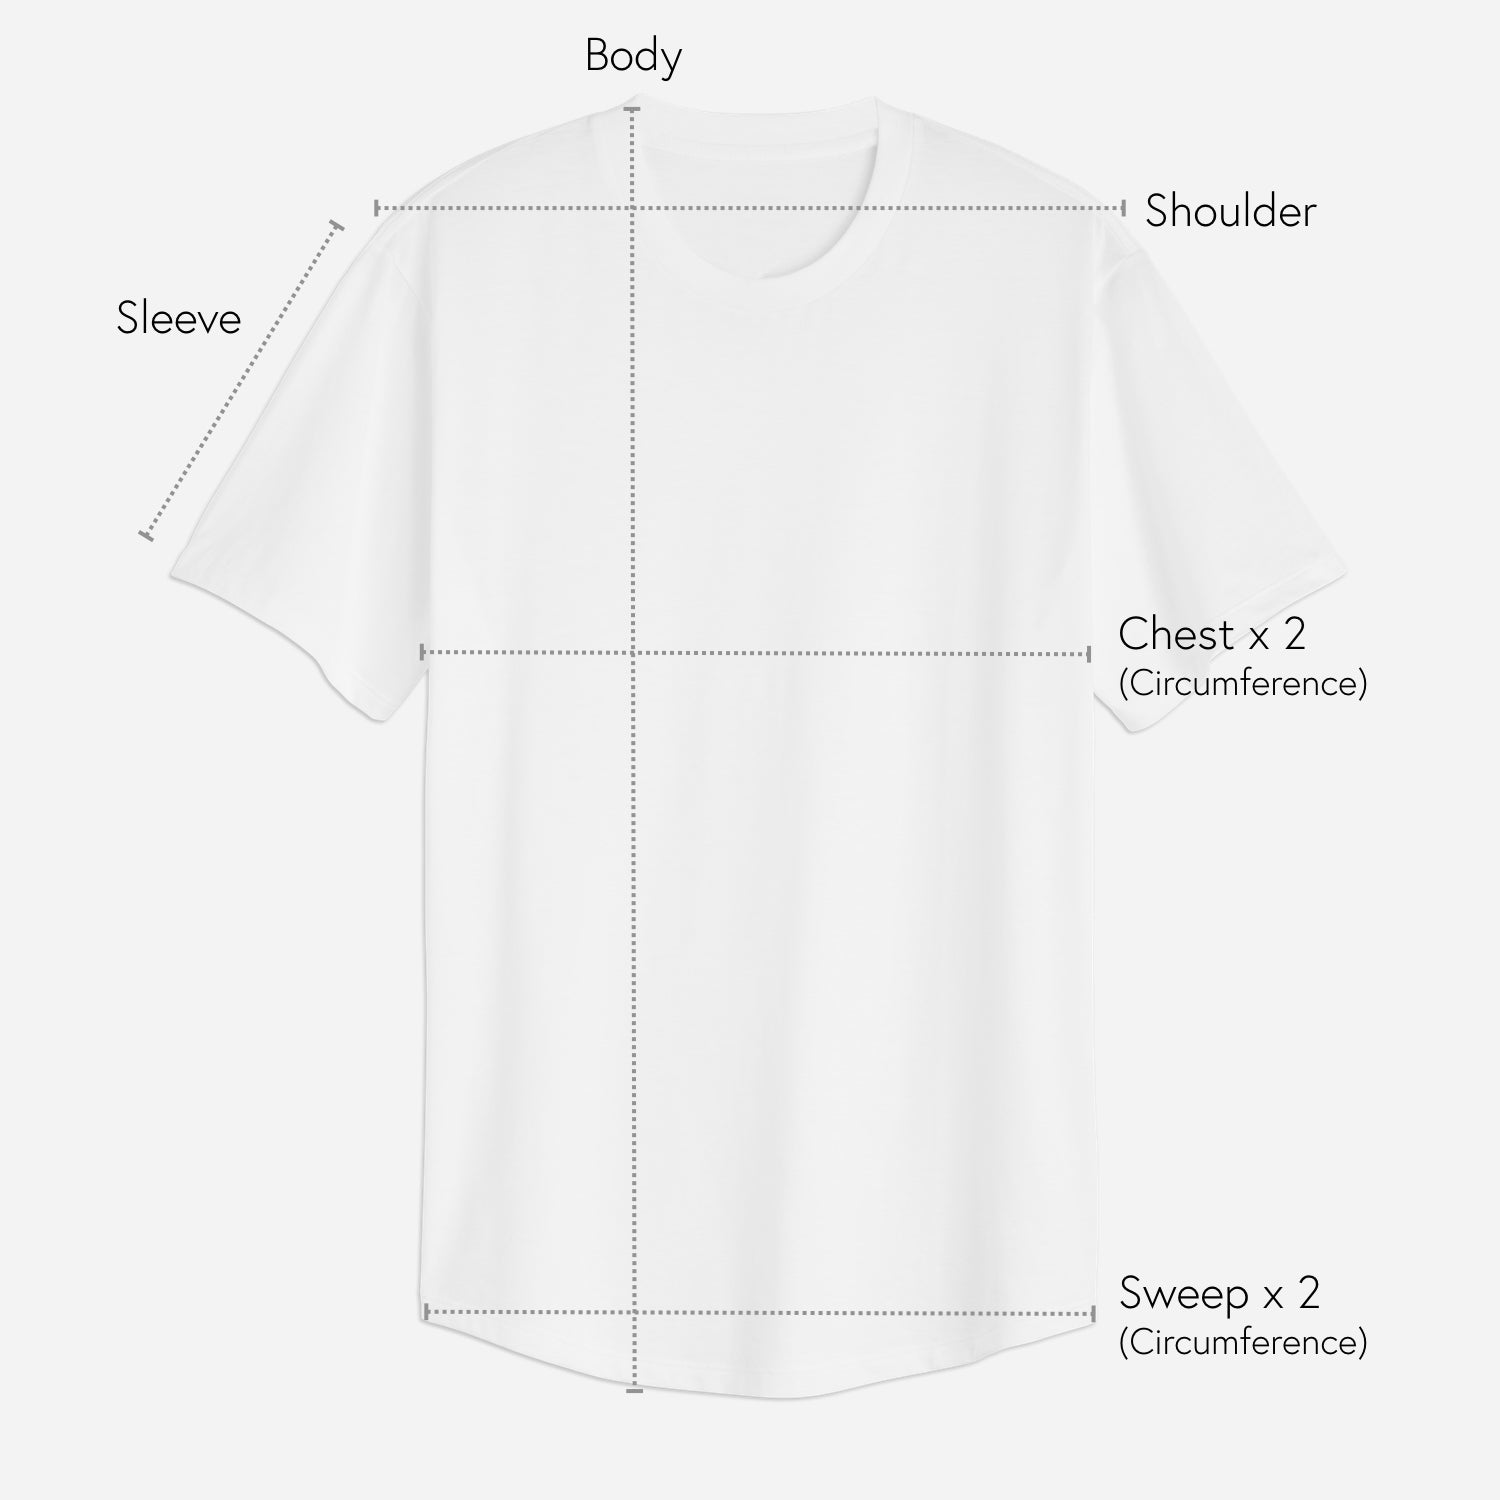 Sizing Chart For T-Shirts